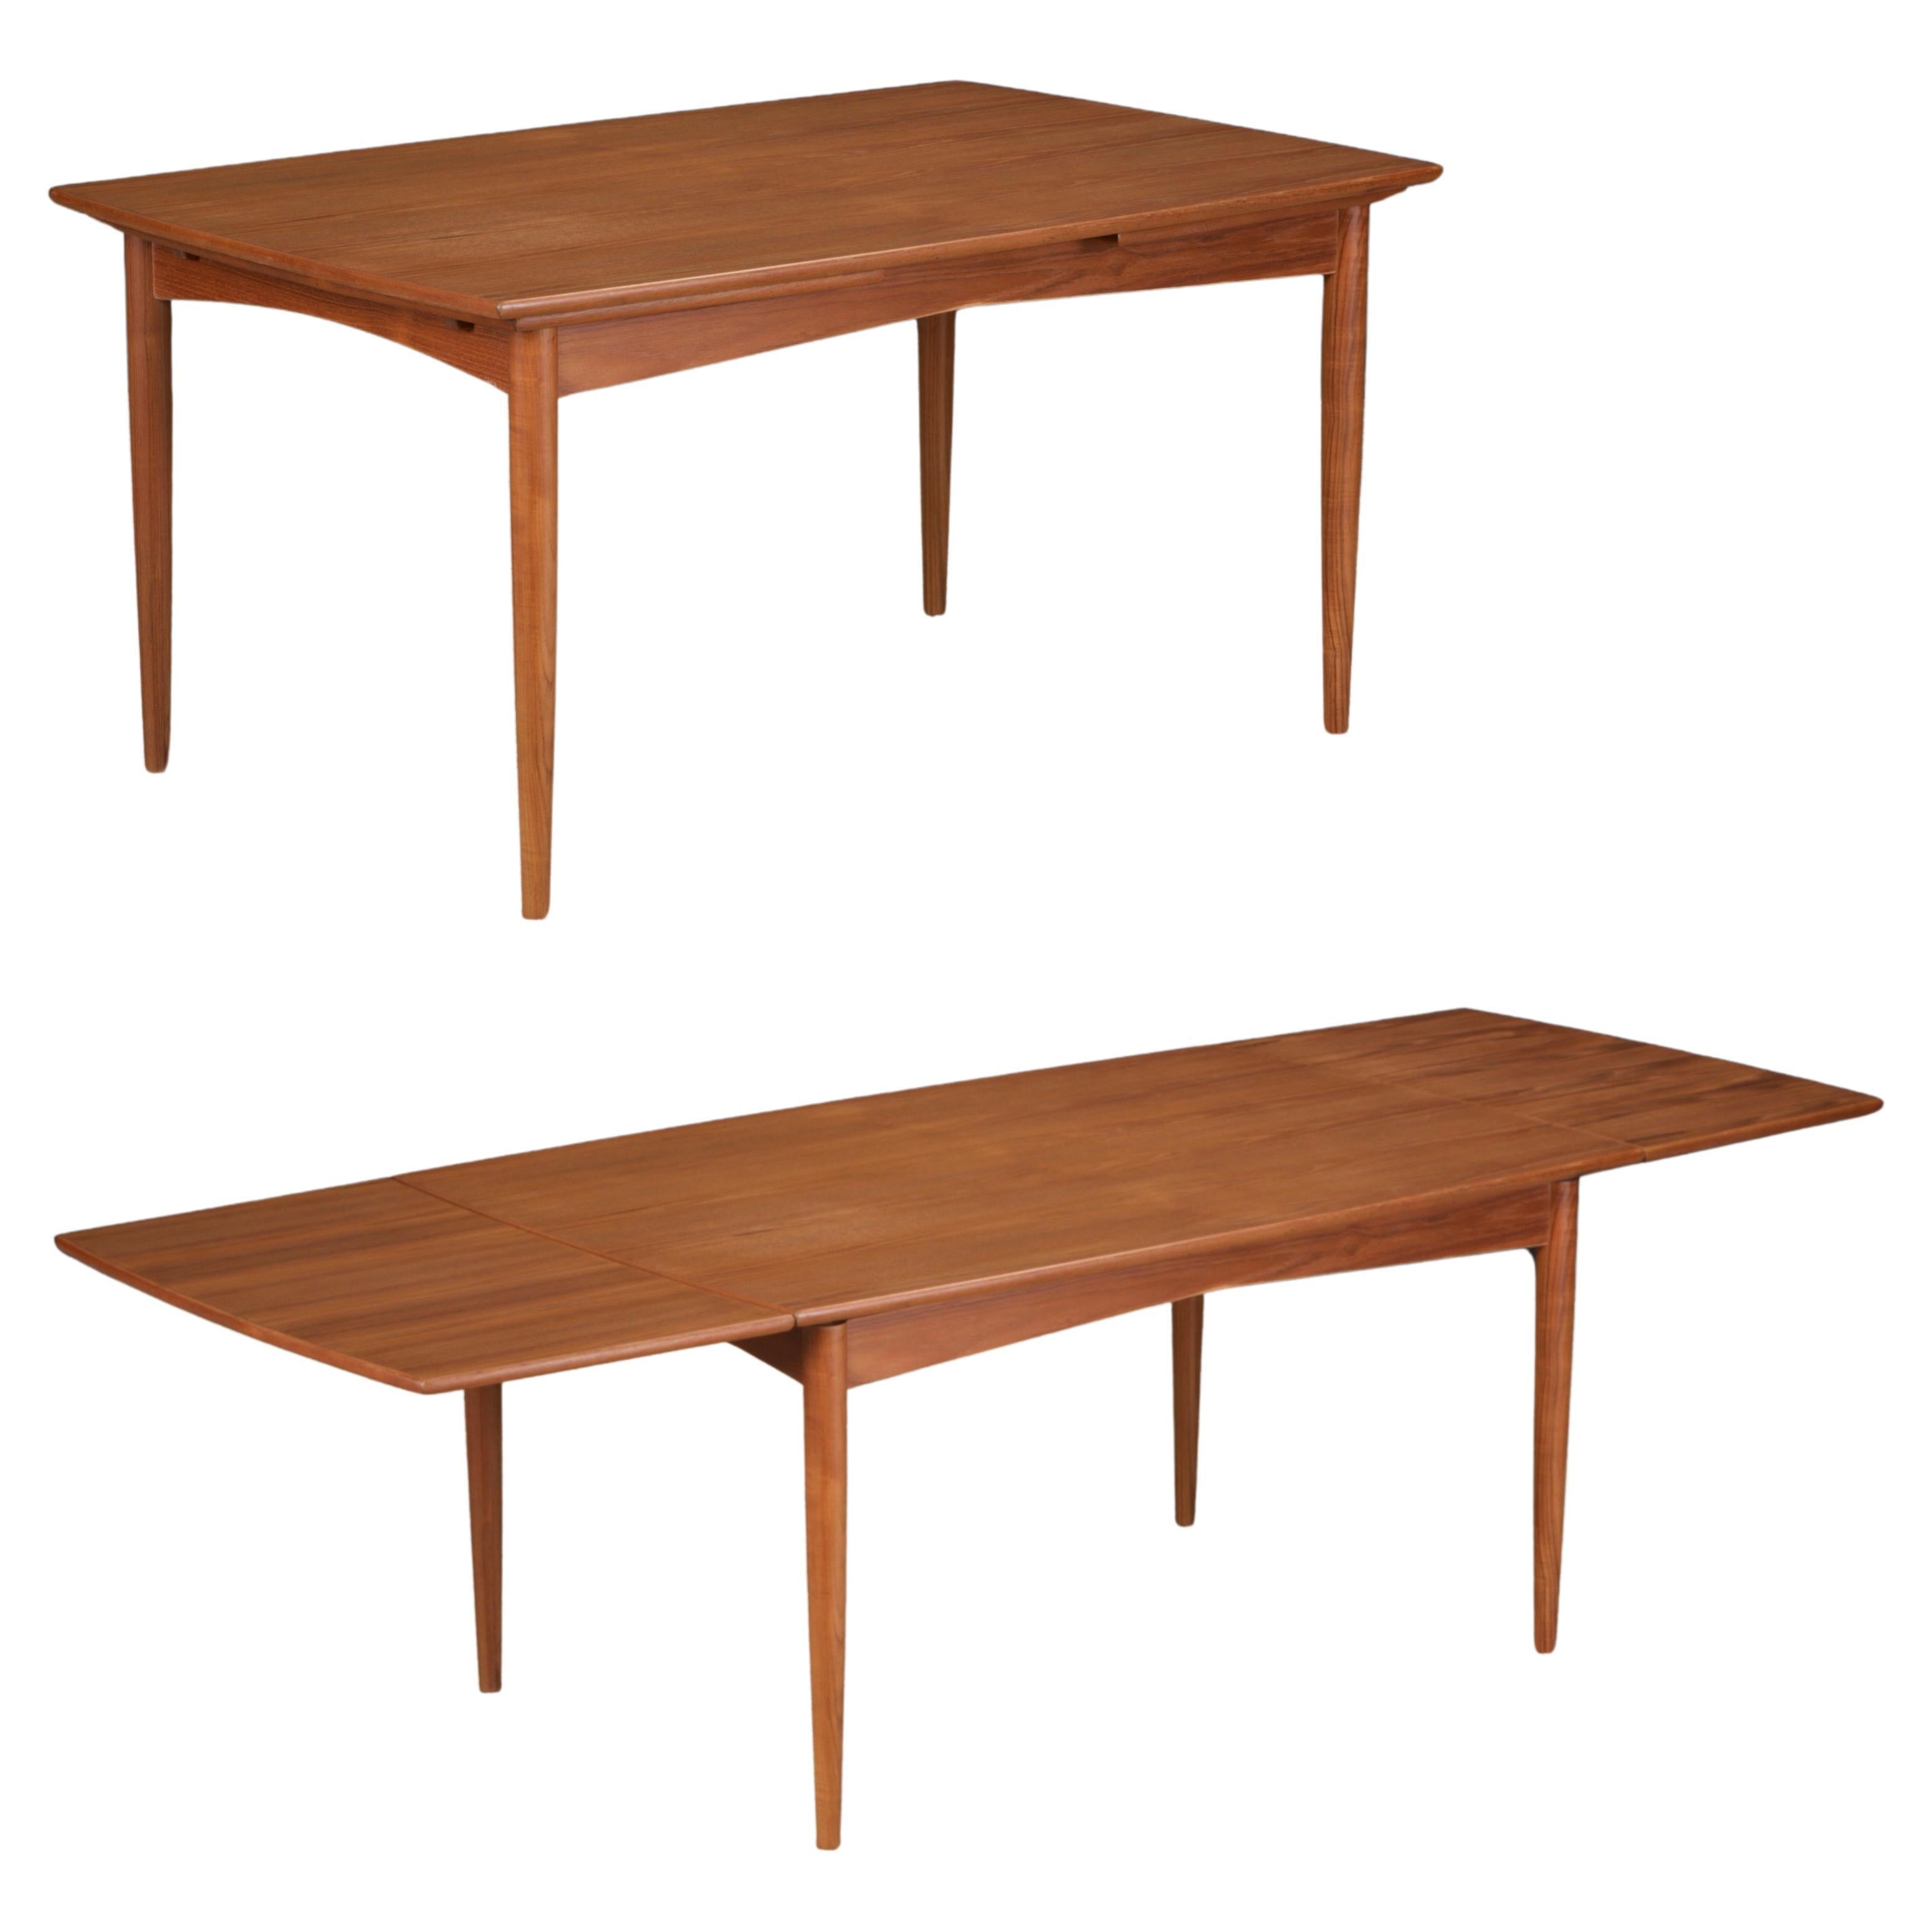 Danish Modern Expandable Teak Dining Table, c 1960s, Refinished For Sale